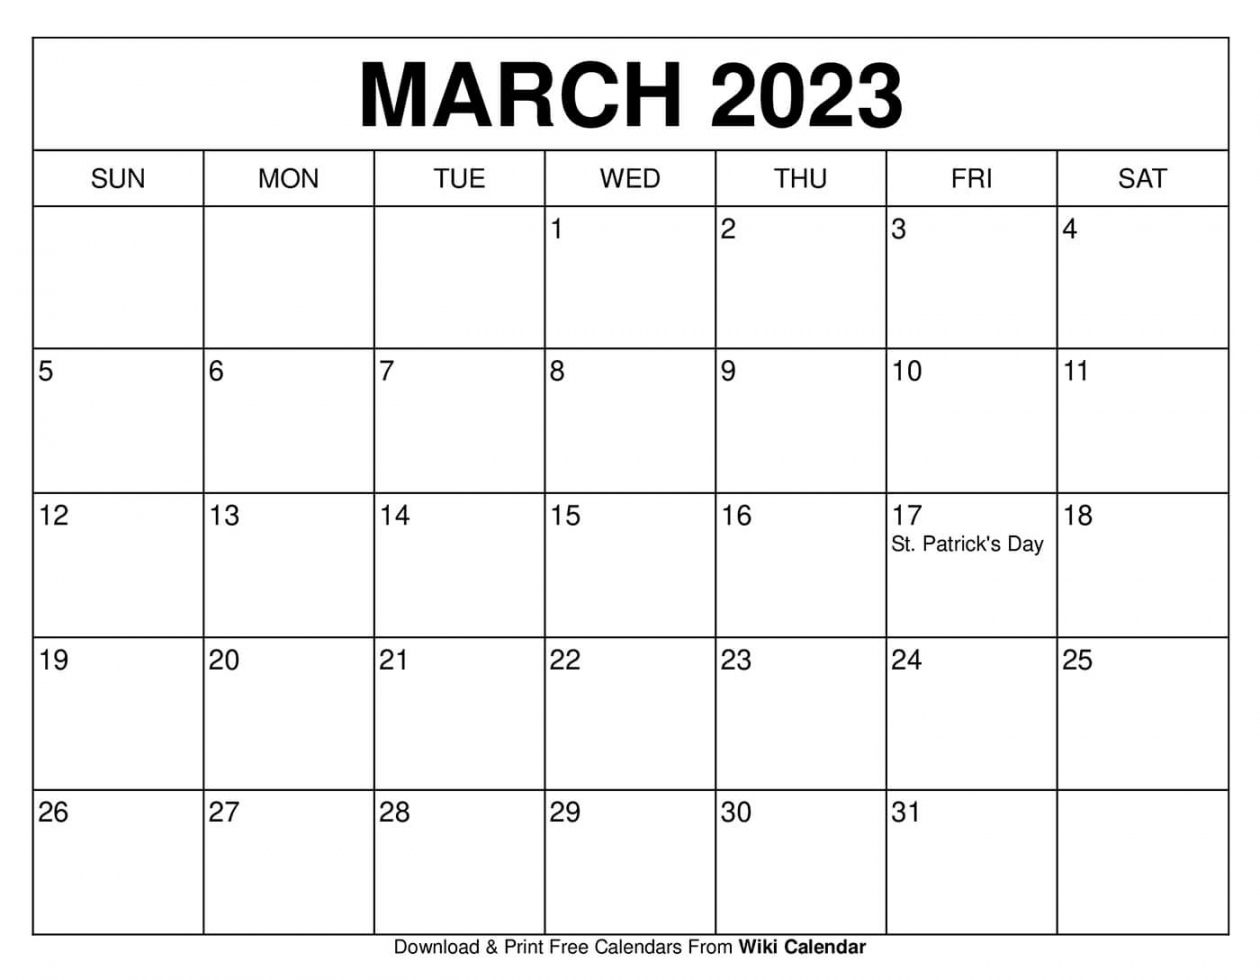 Free Printable March  Calendar Templates With Holidays - FREE Printables - Free Printable Calendar March